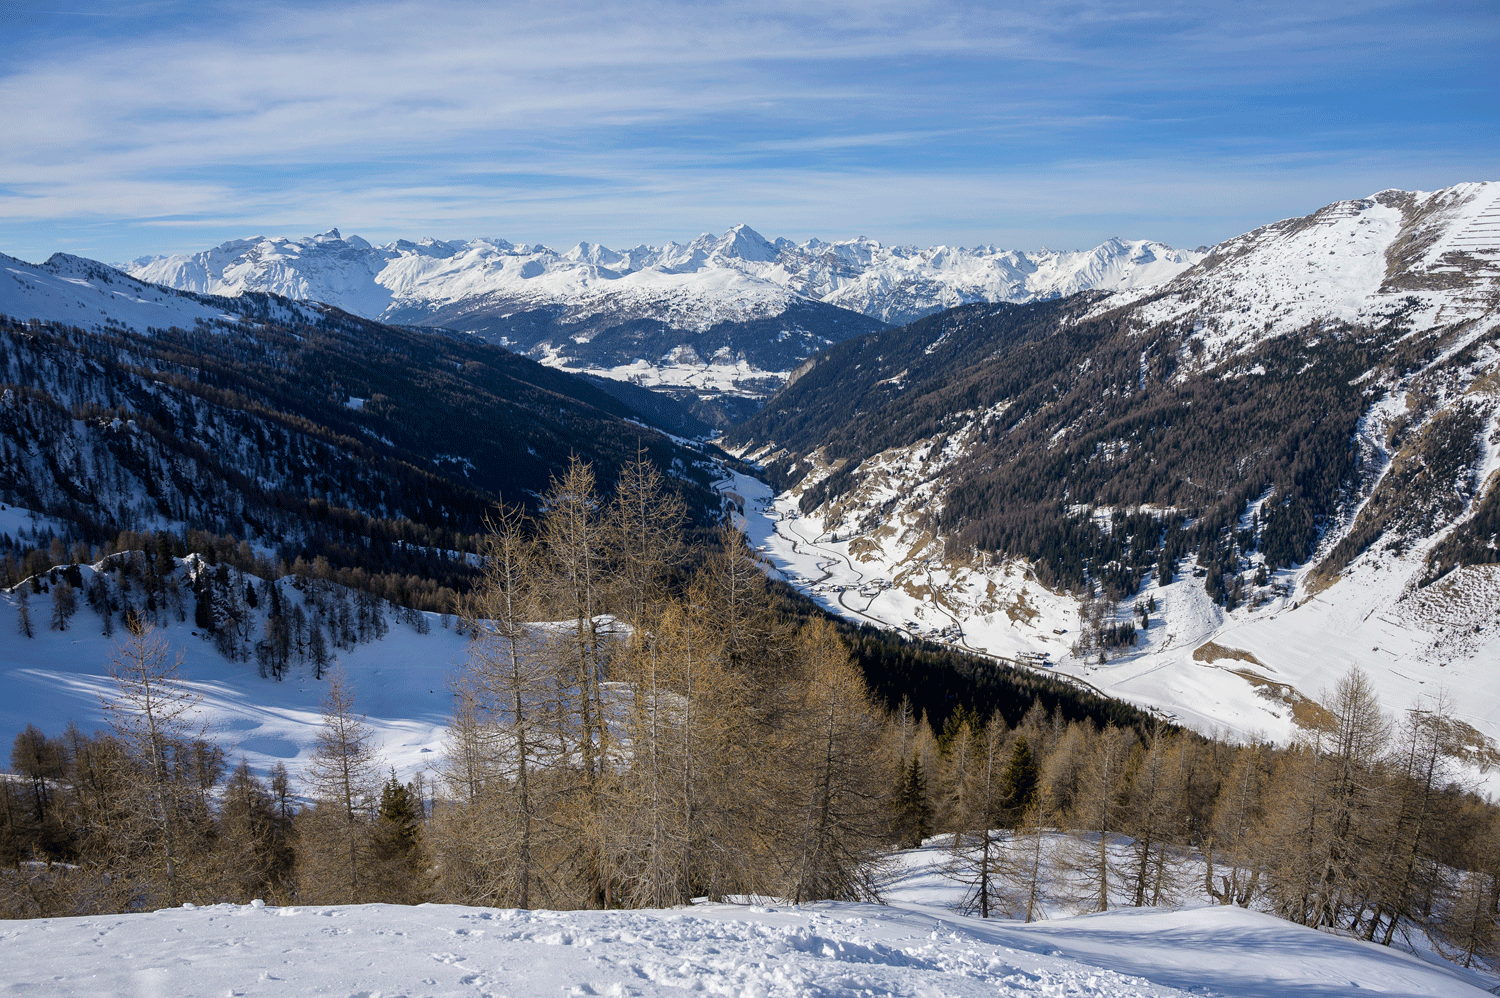 View over Schmirntal Valley and the Stubai Alps from the top of Rauher Kopf Peak.